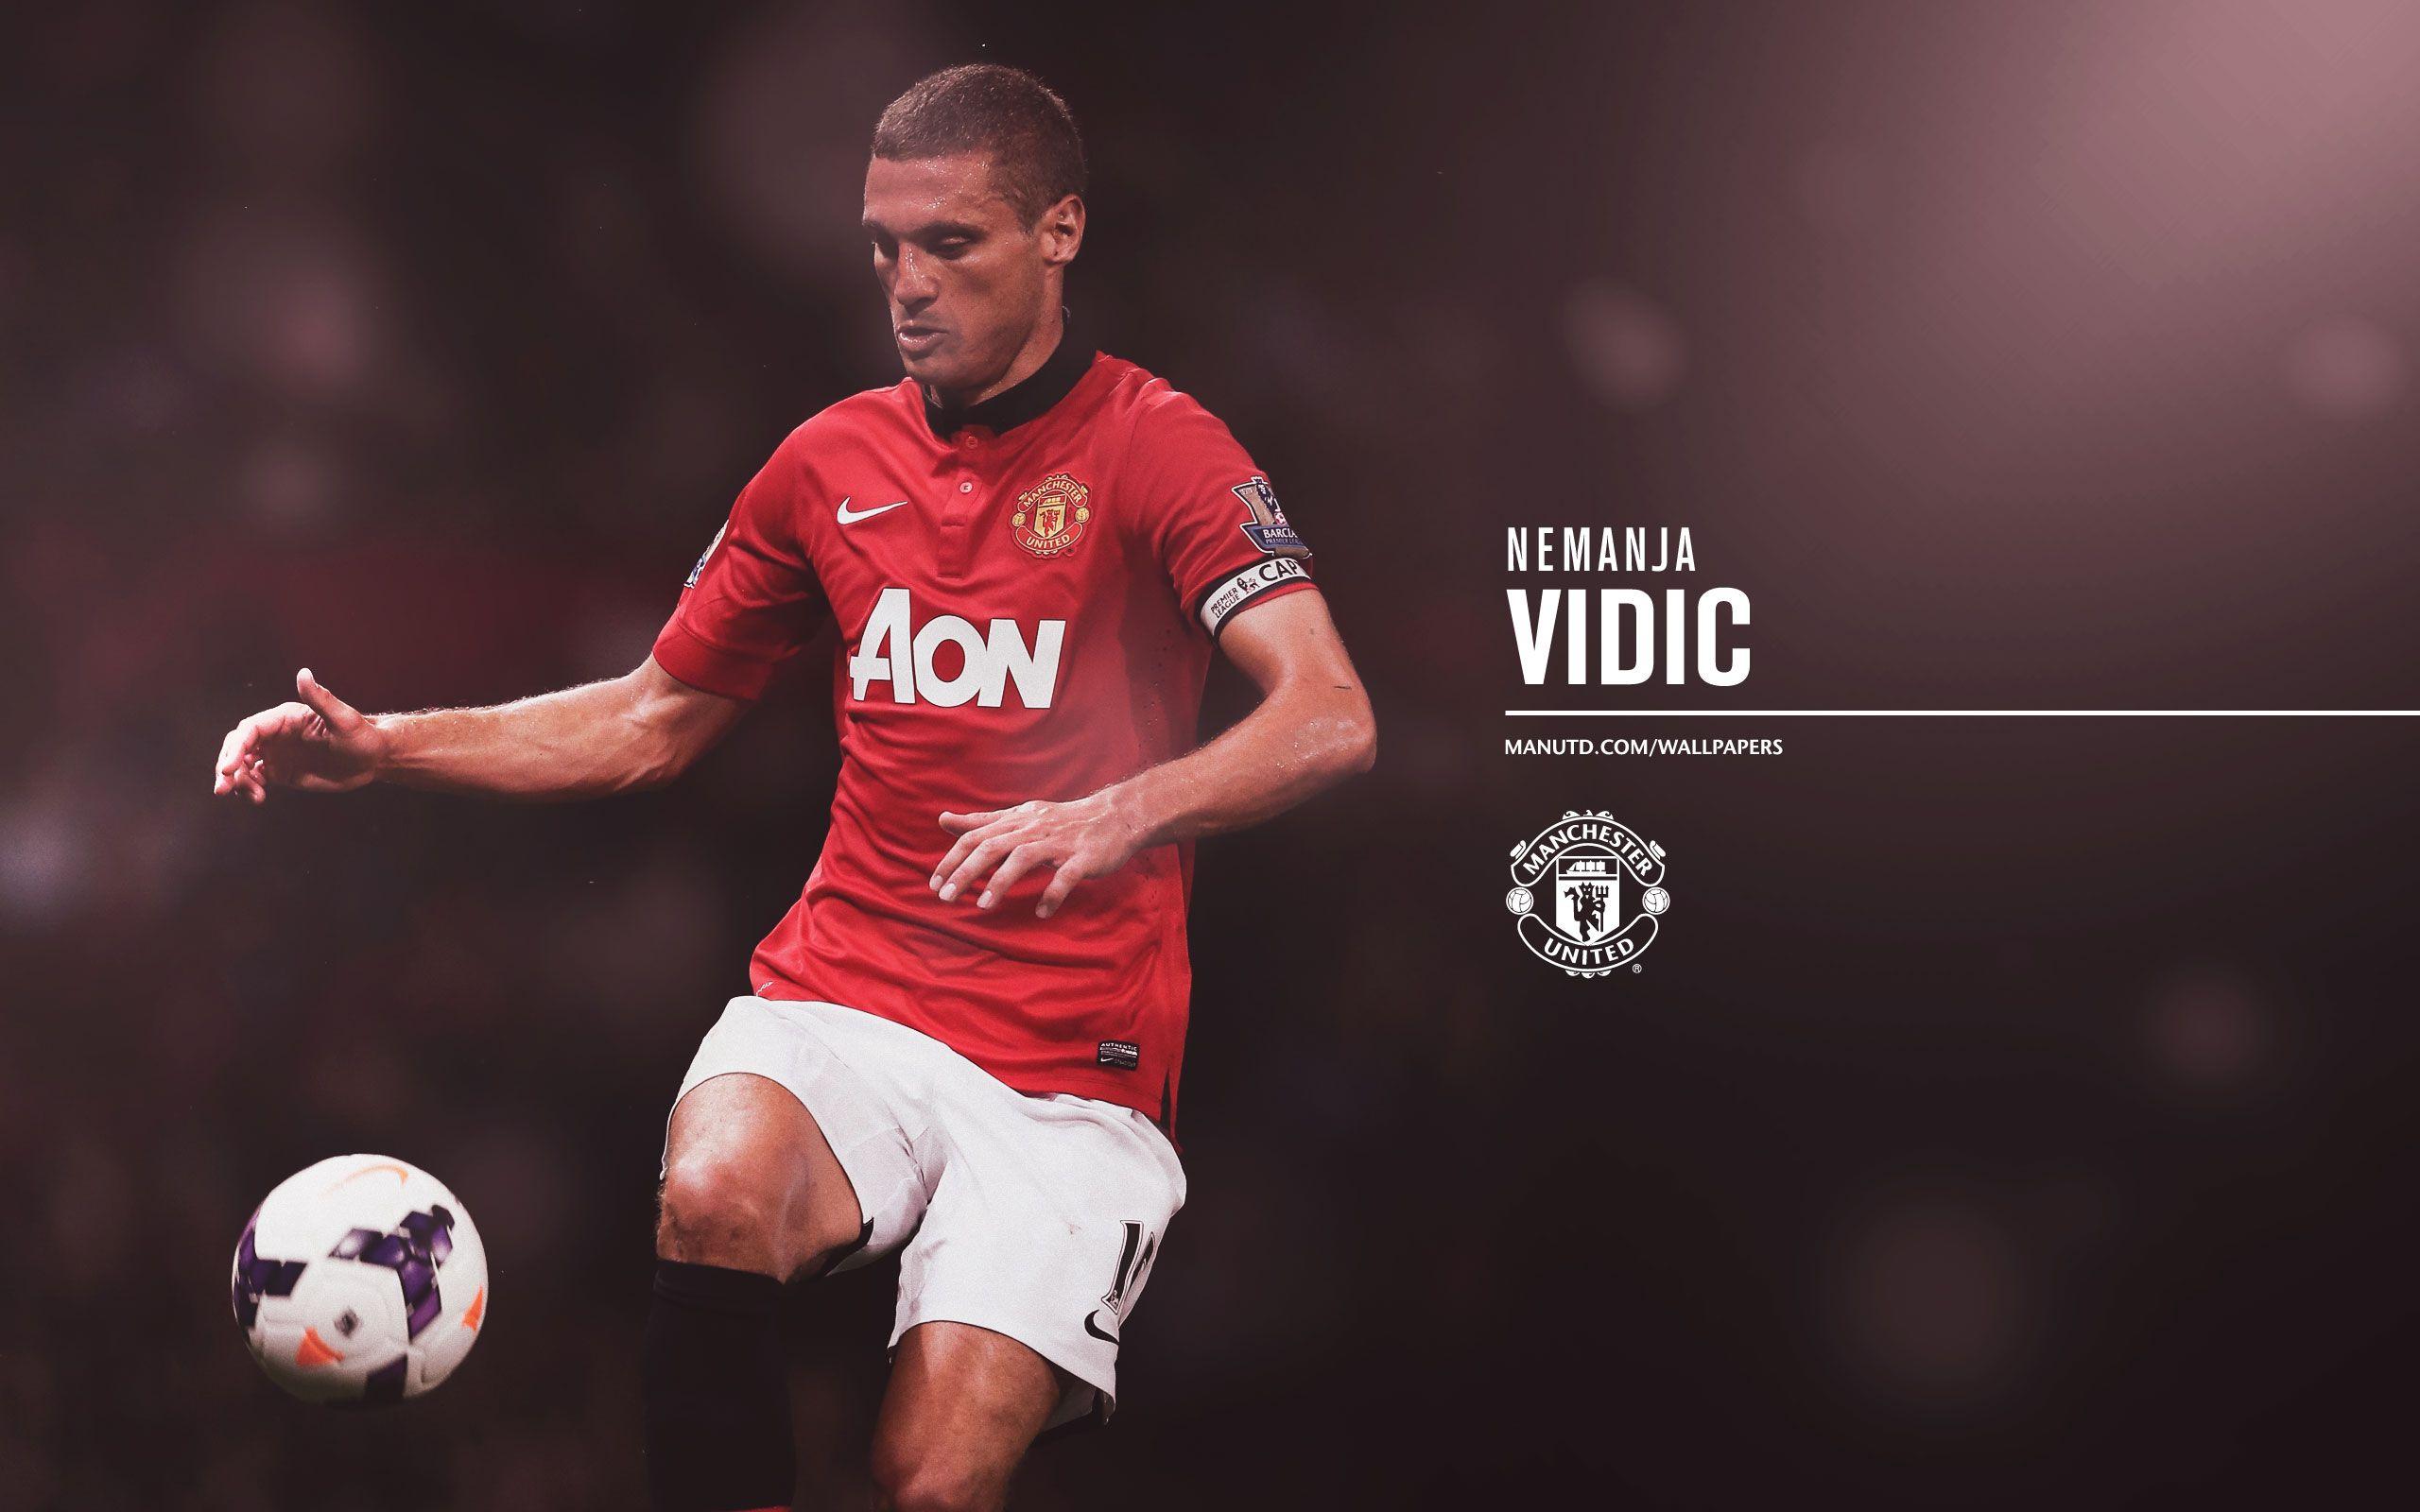 Players. Manchester United Wallpaper